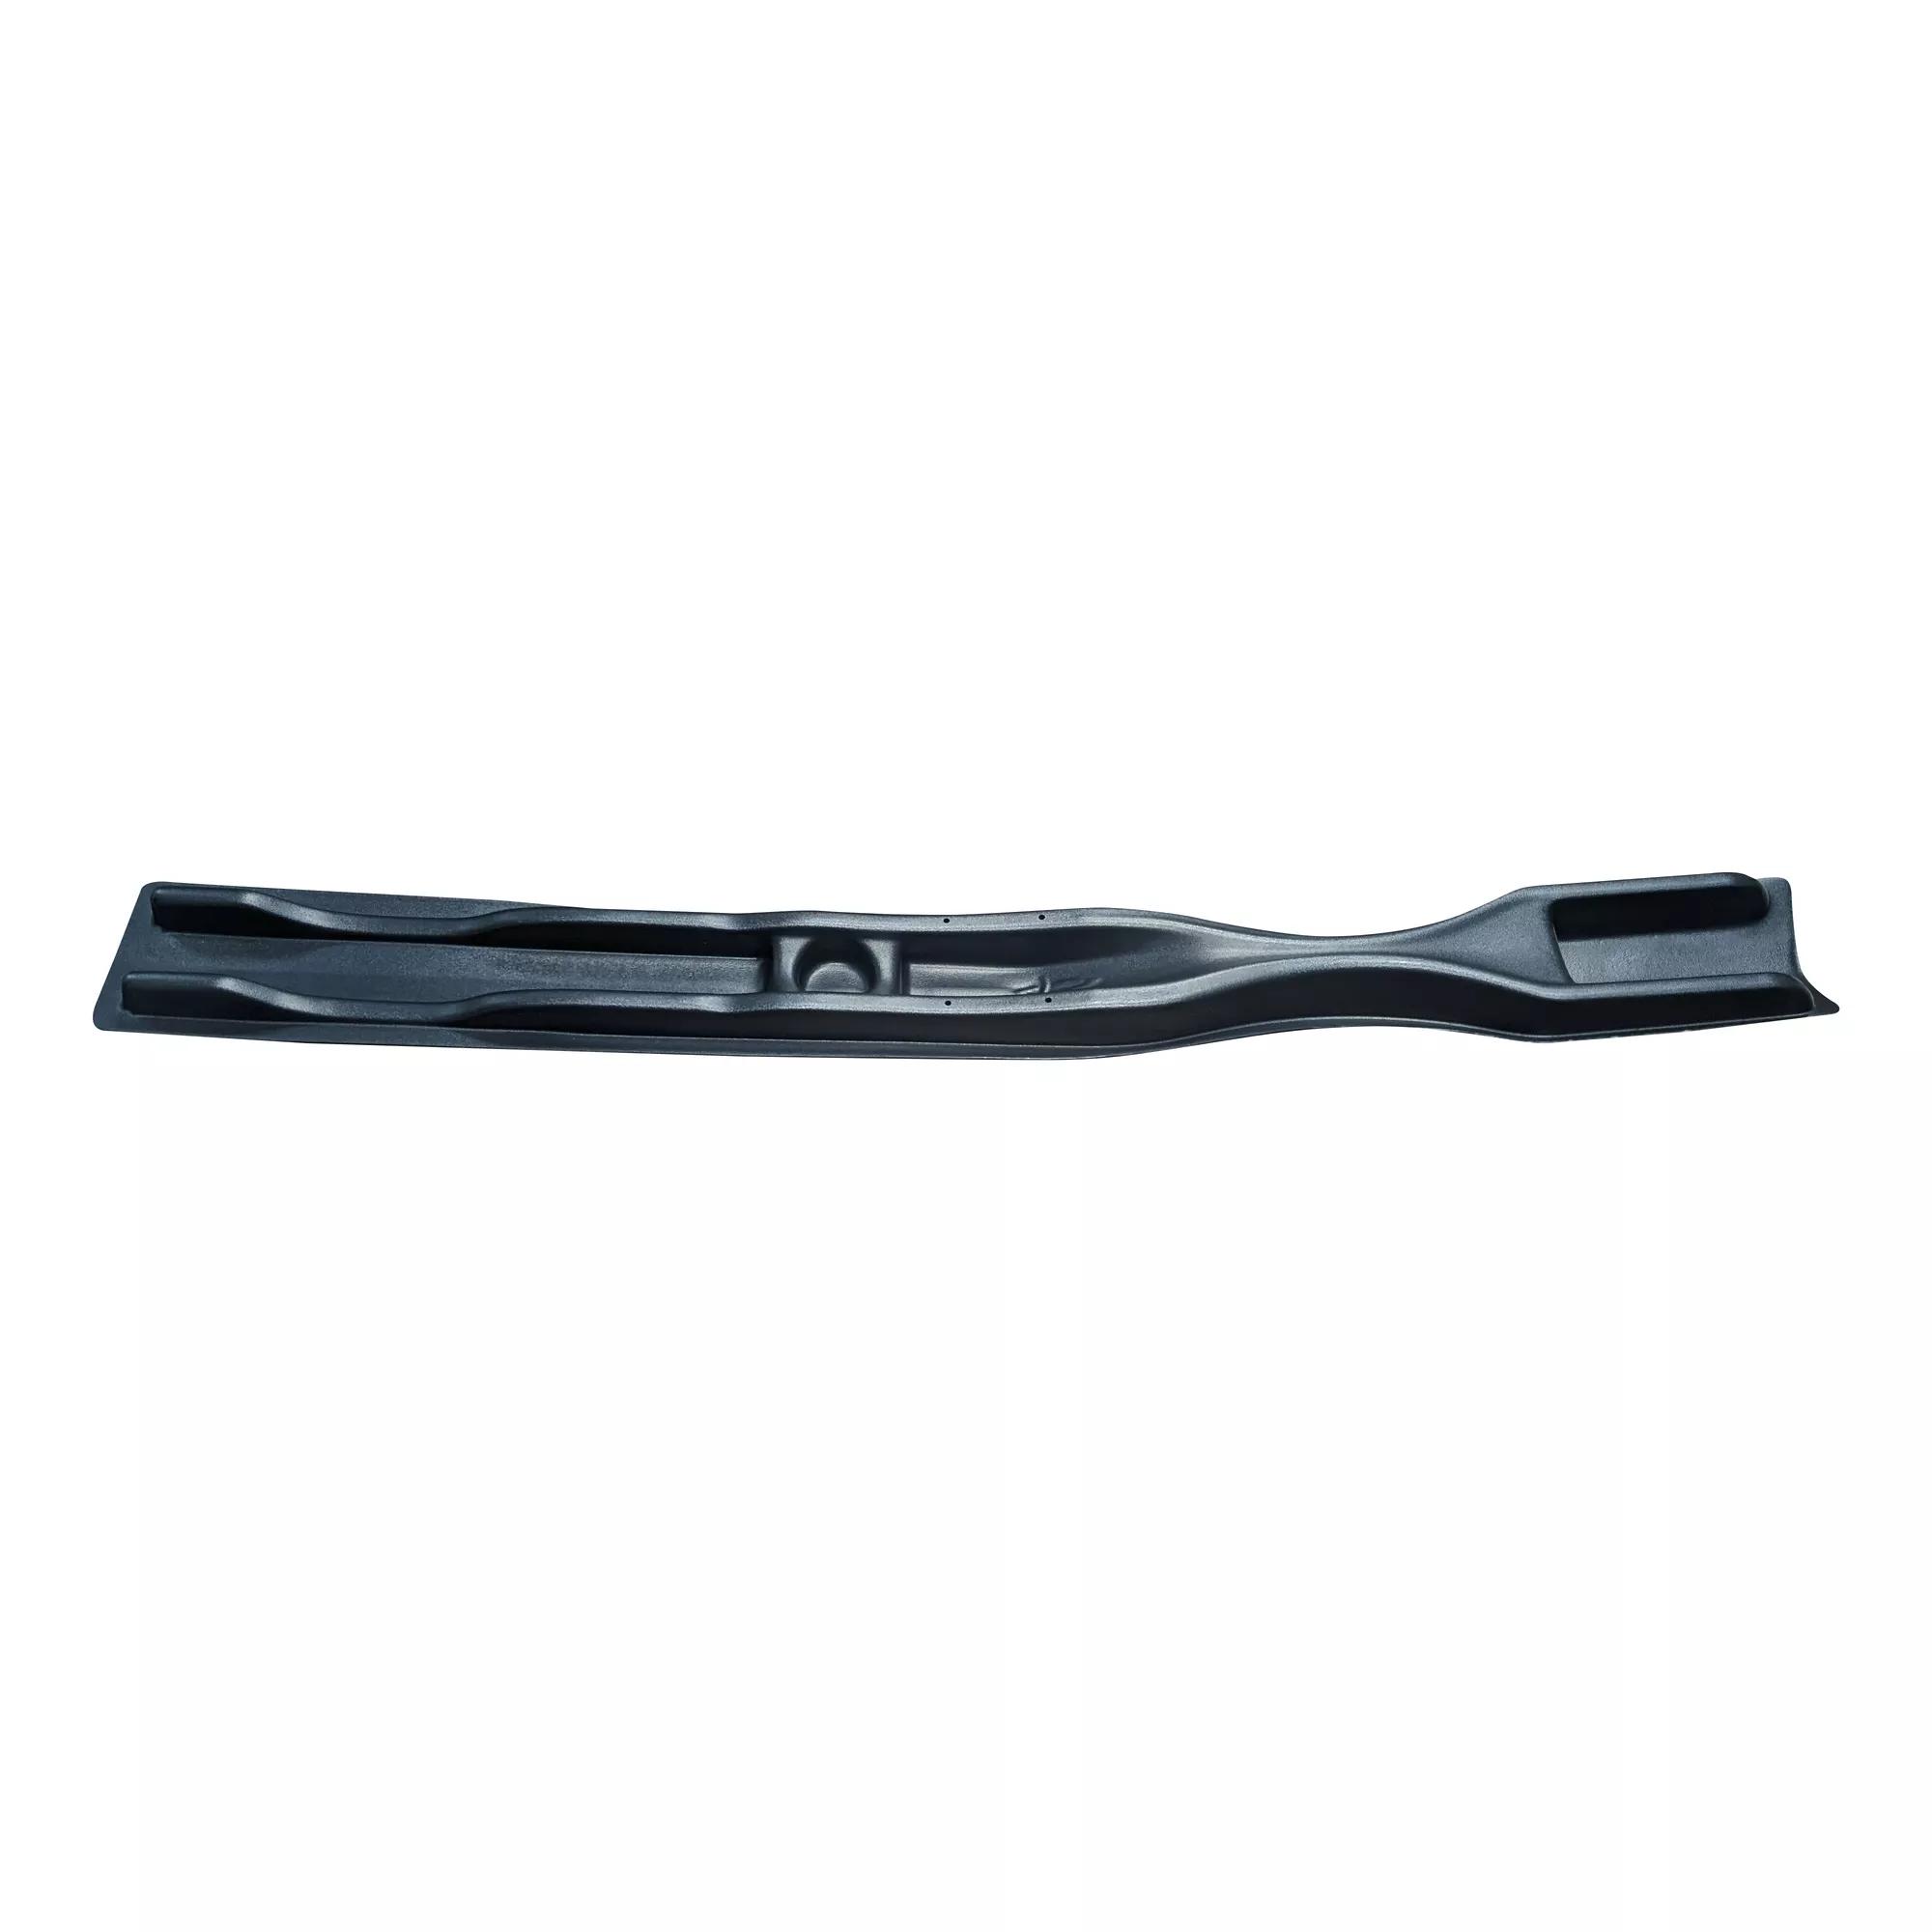 DAGGER - Hull Support Channel - For Axis Kayak Seat -  - 9800376 - 